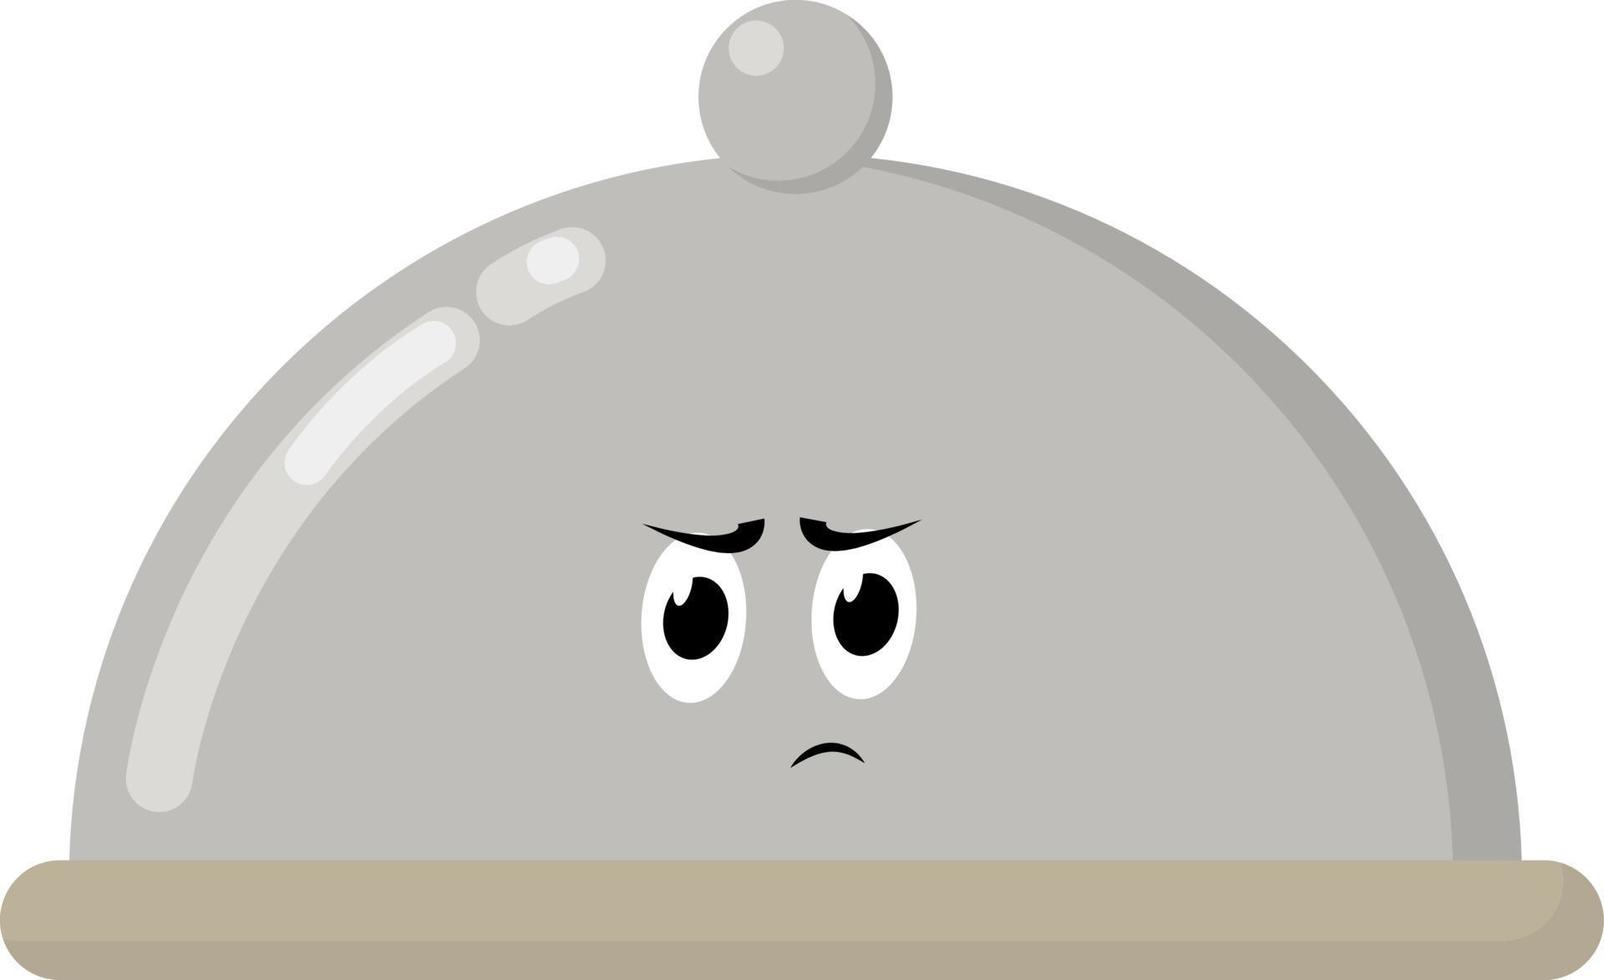 Angry cloche, illustration, vector on white background.